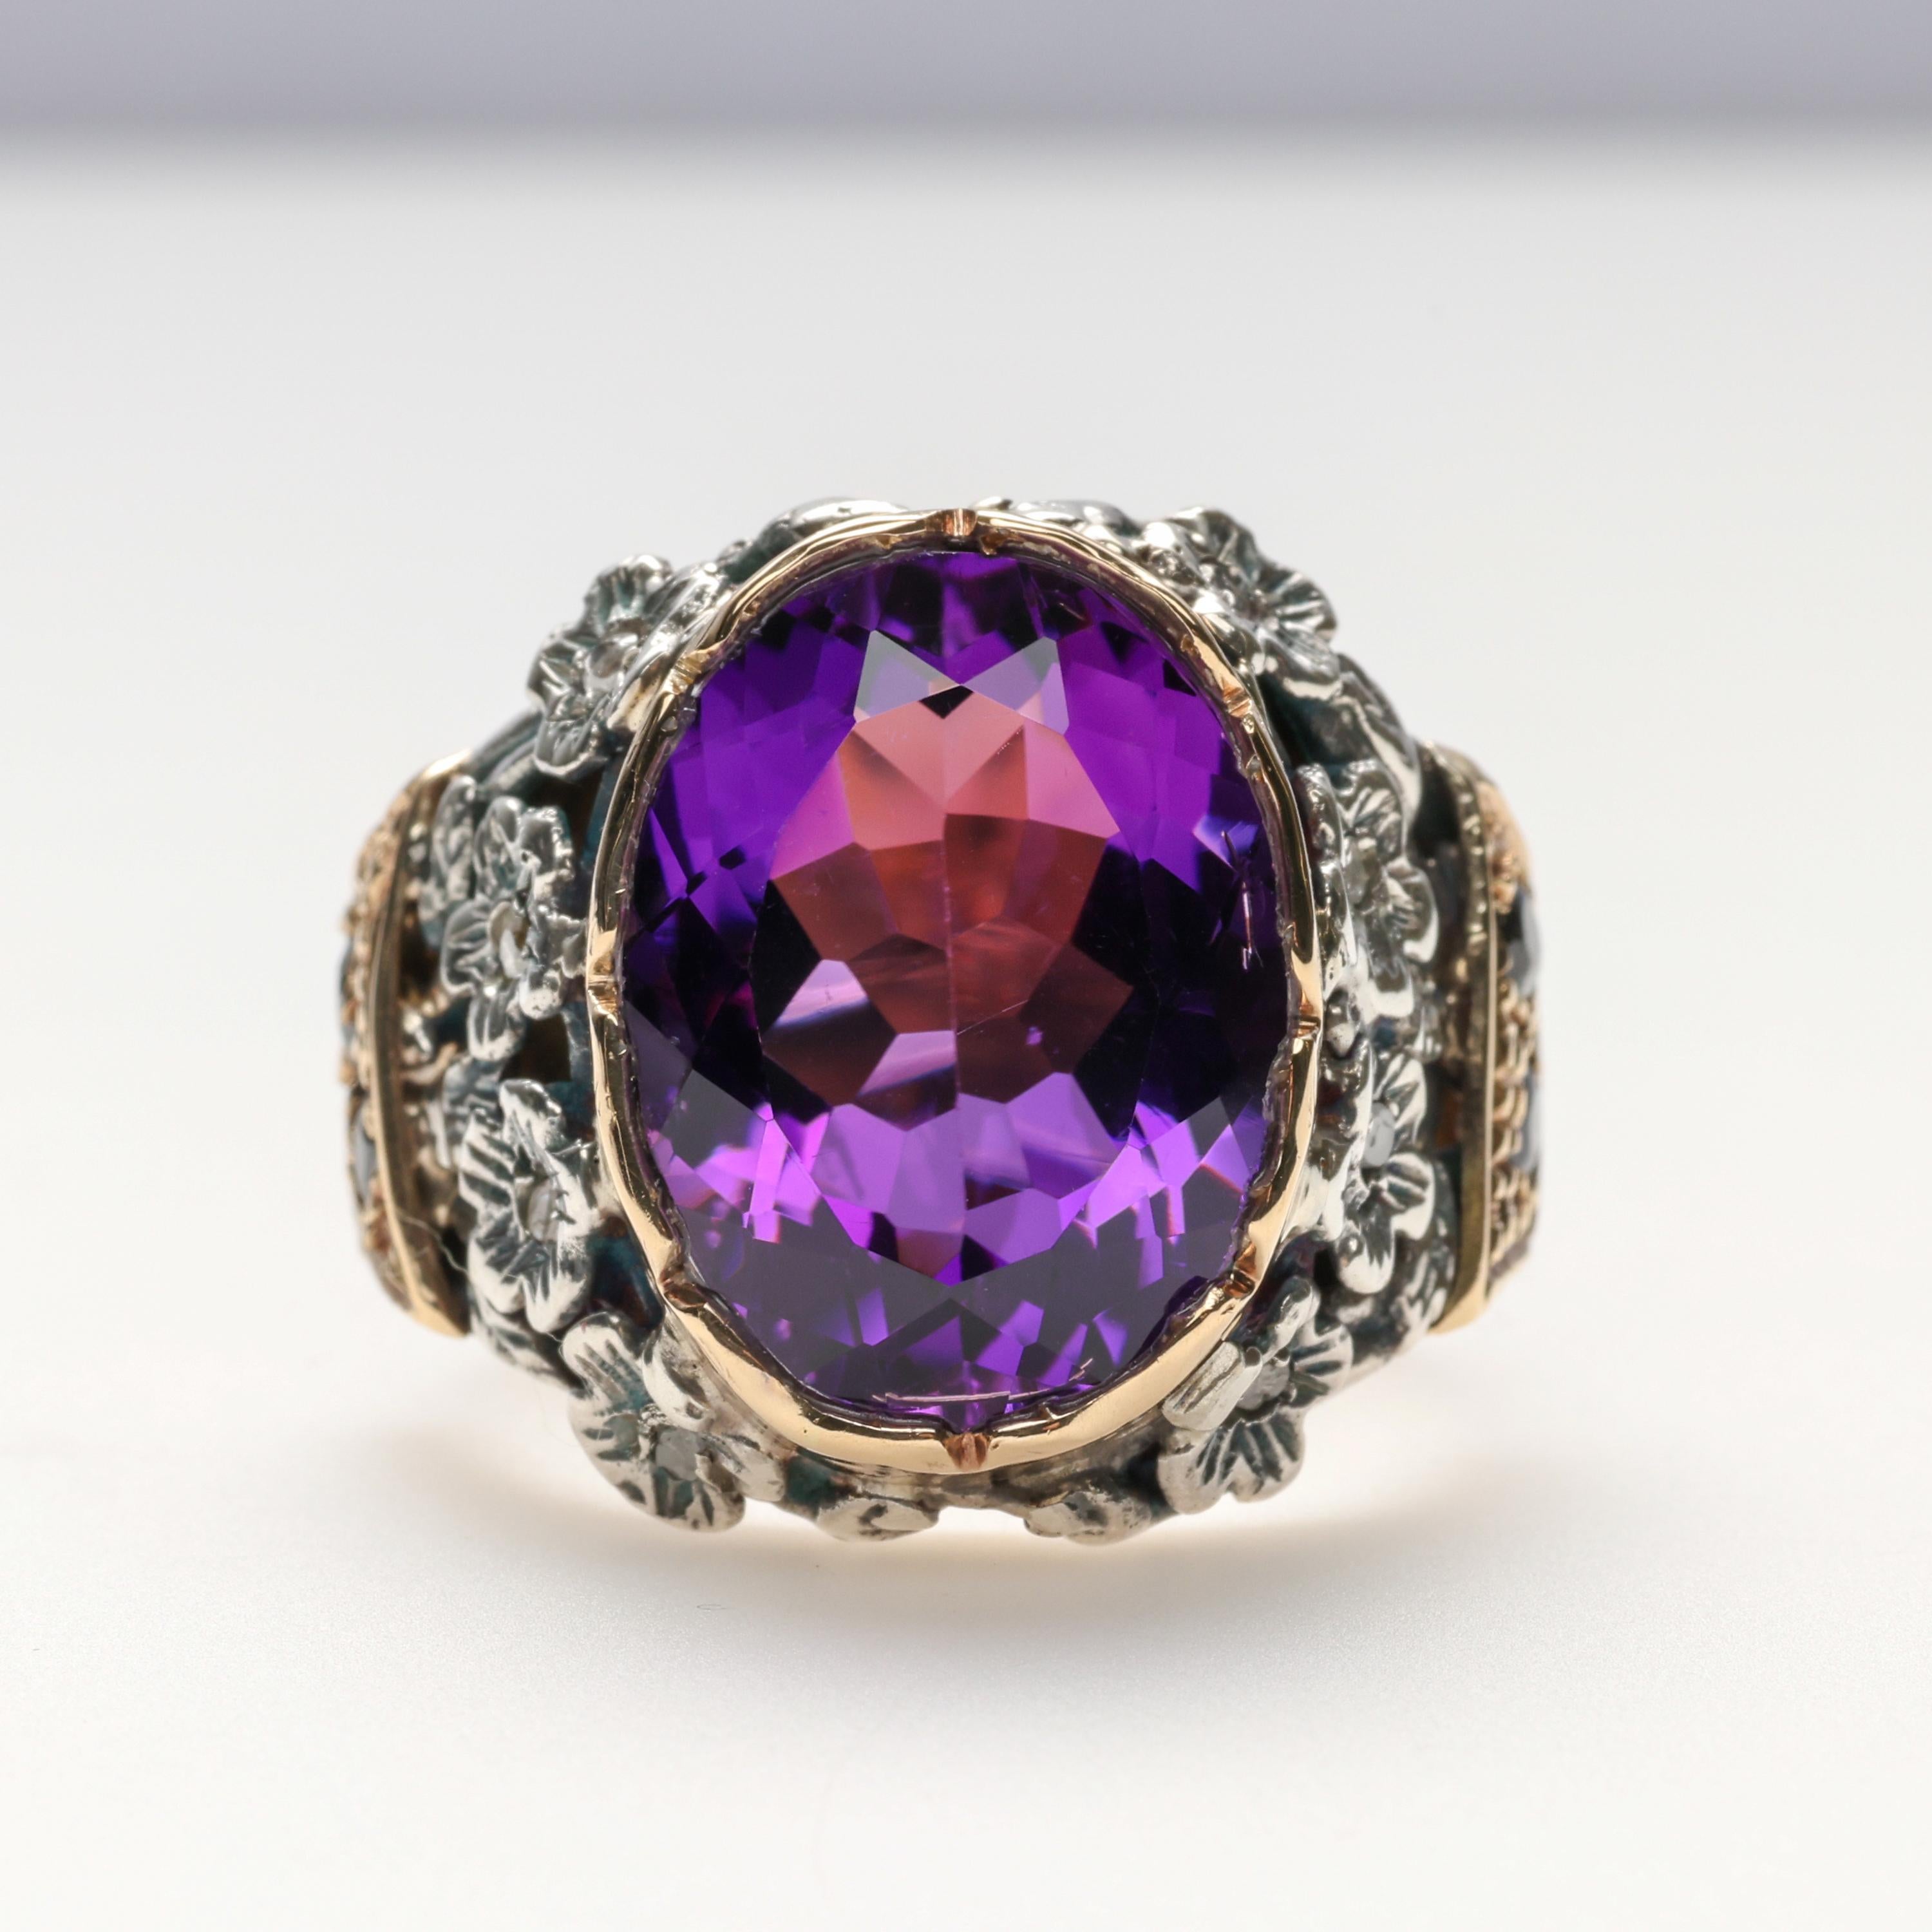 This spectacular original antique Victorian ring features a 17 x 13mm natural amethyst that weighs approximately 9 carats. This pristine gem is set within a notched bezel, surrounded by silver flowers, each set with a central tiny single-cut